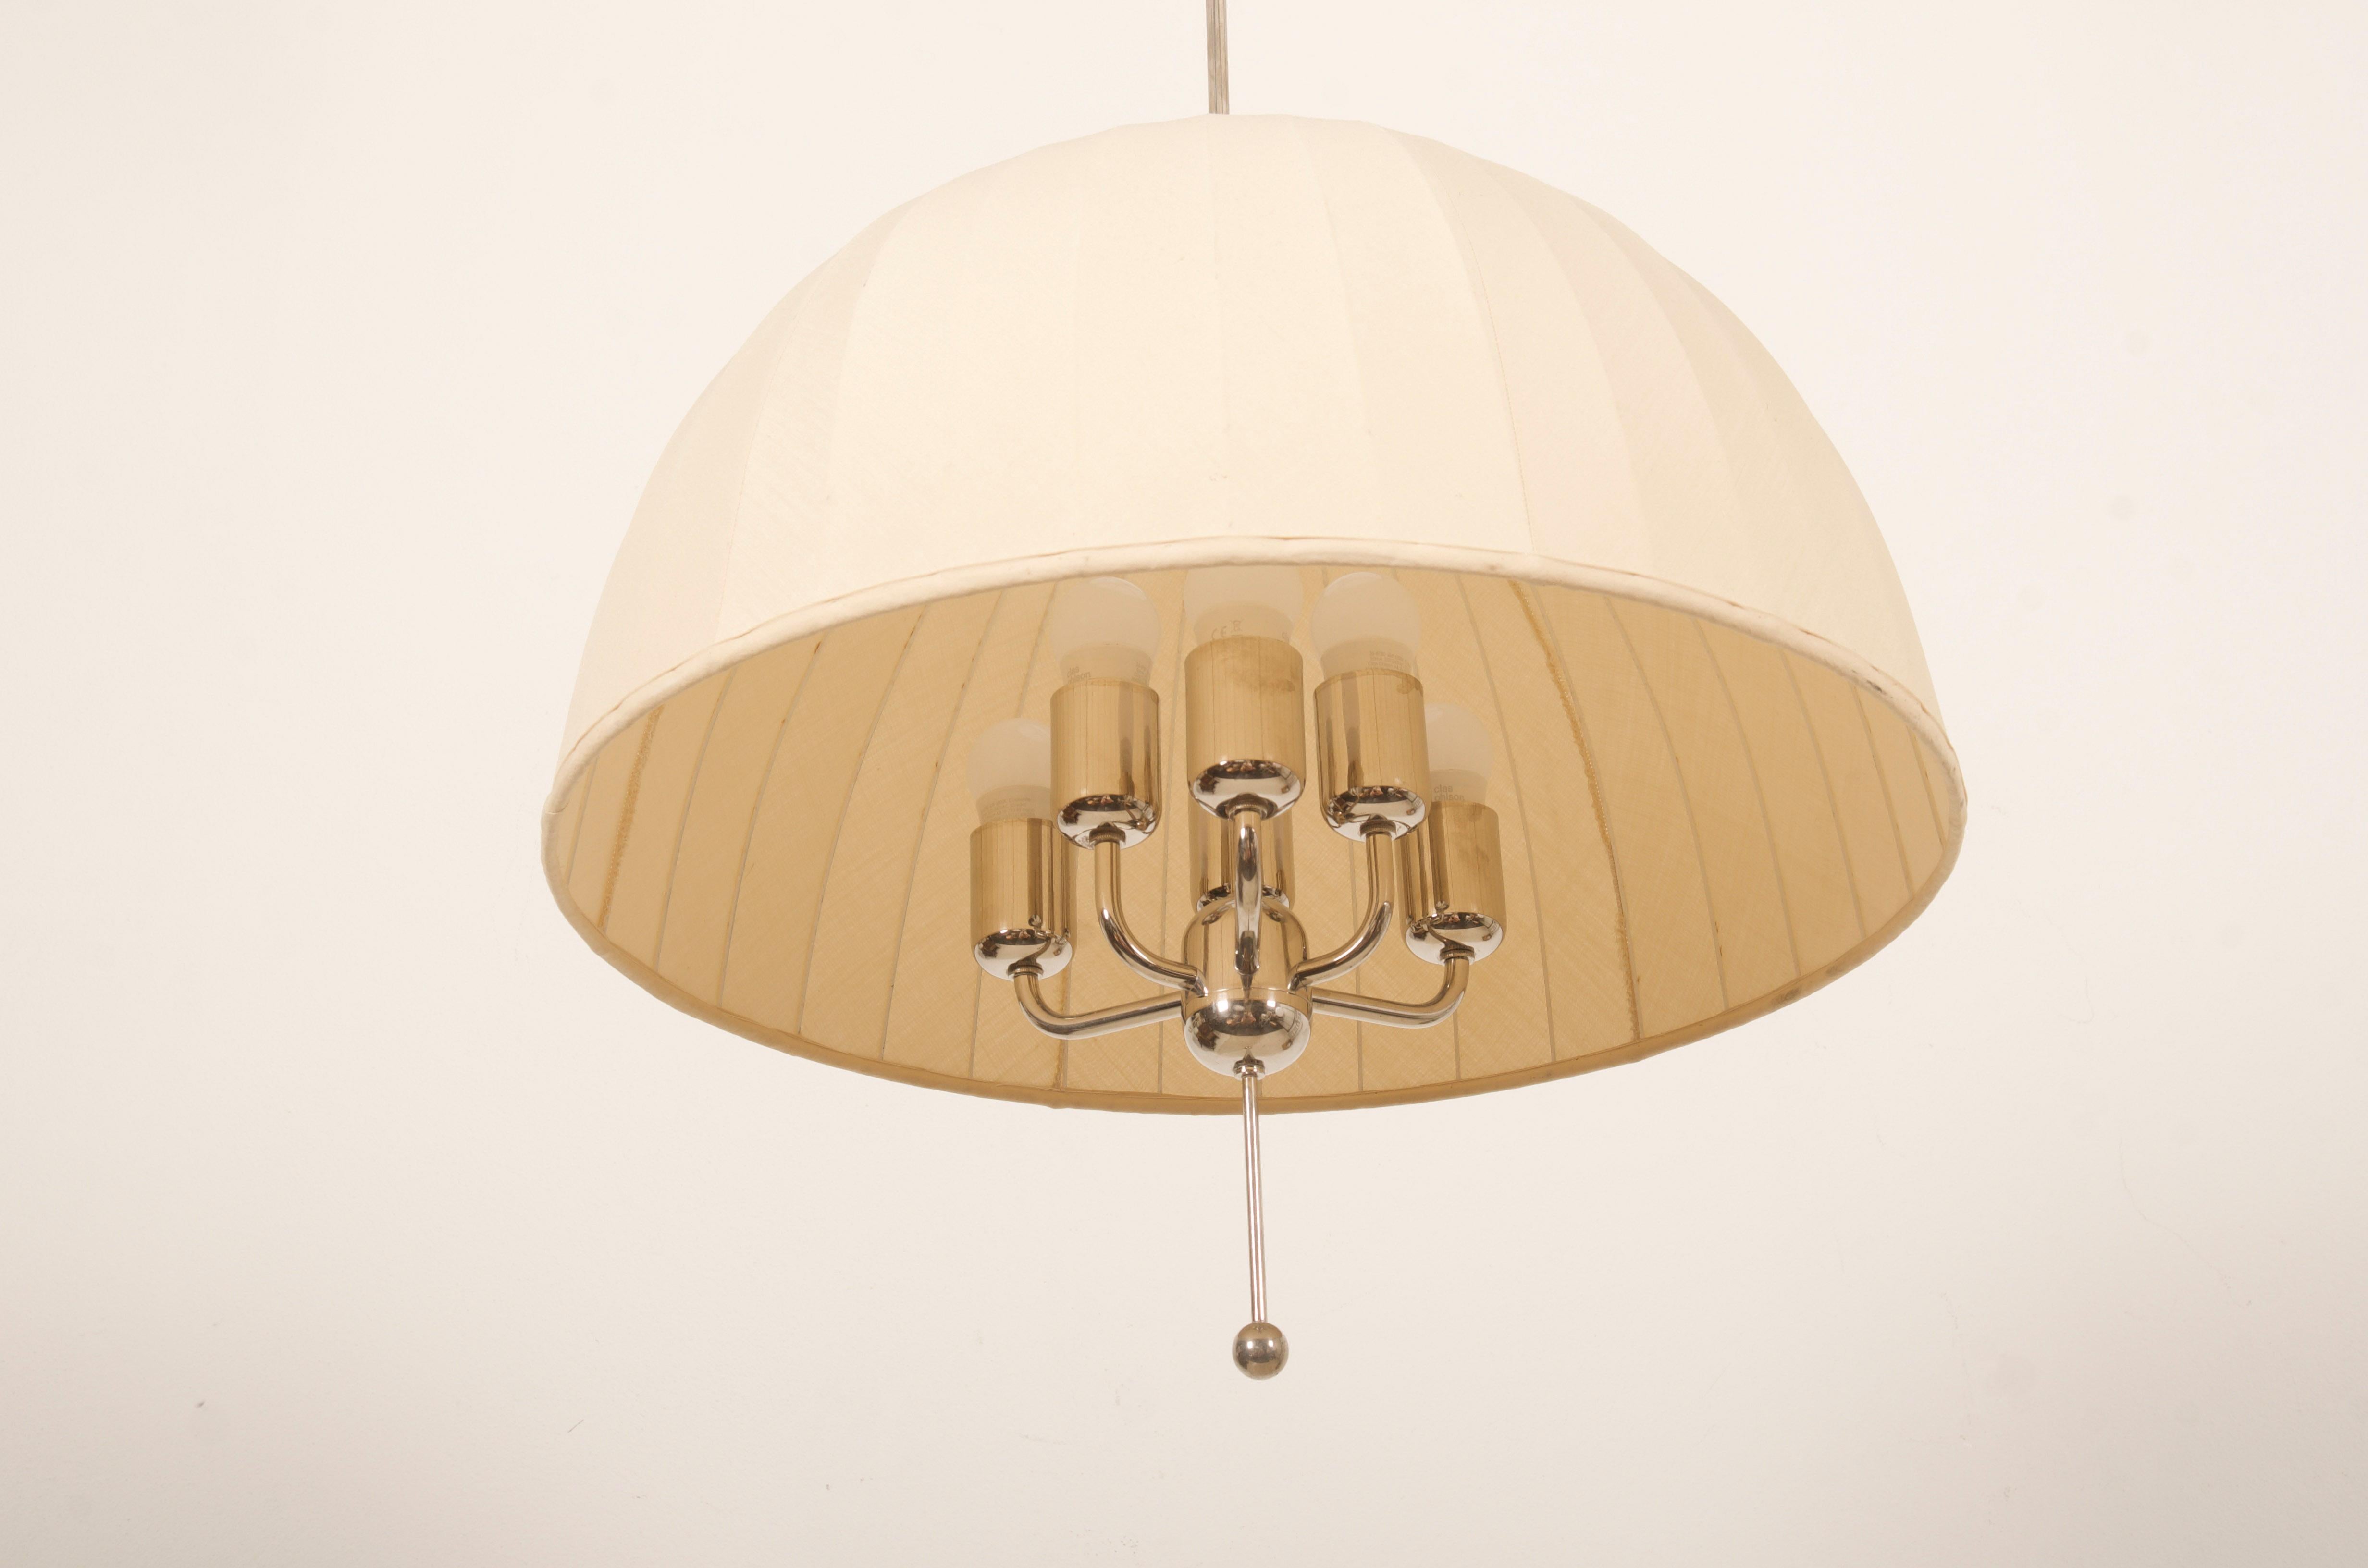 Rare large ceiling pendant with shade in cream/yellow fabric on white lacquered metal mount. 
Model Carolin T549/6 in chrom designed 1963 by Hans-Agne Jakobsson. Lamp itself and the shade are height adjustable.
6 x E27 bulbs.